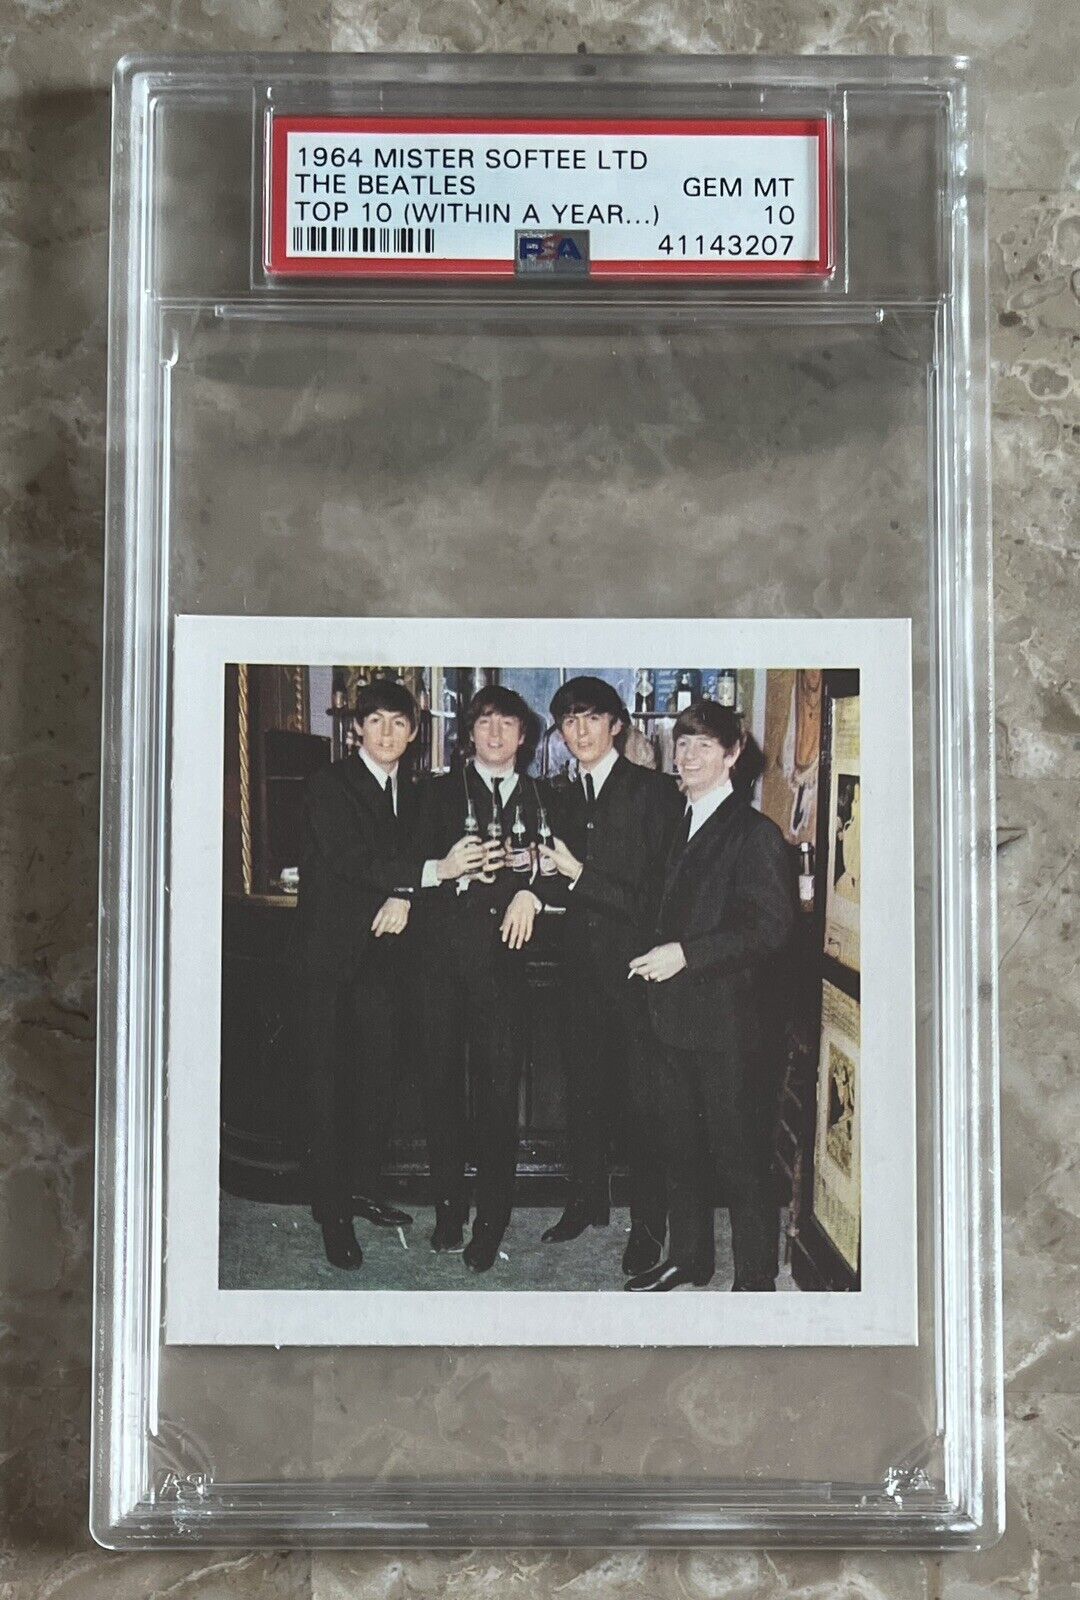 1964 Mister Softee The Beatles RC PSA 10 Gem Mint POP 6 Top Ten Within a Year